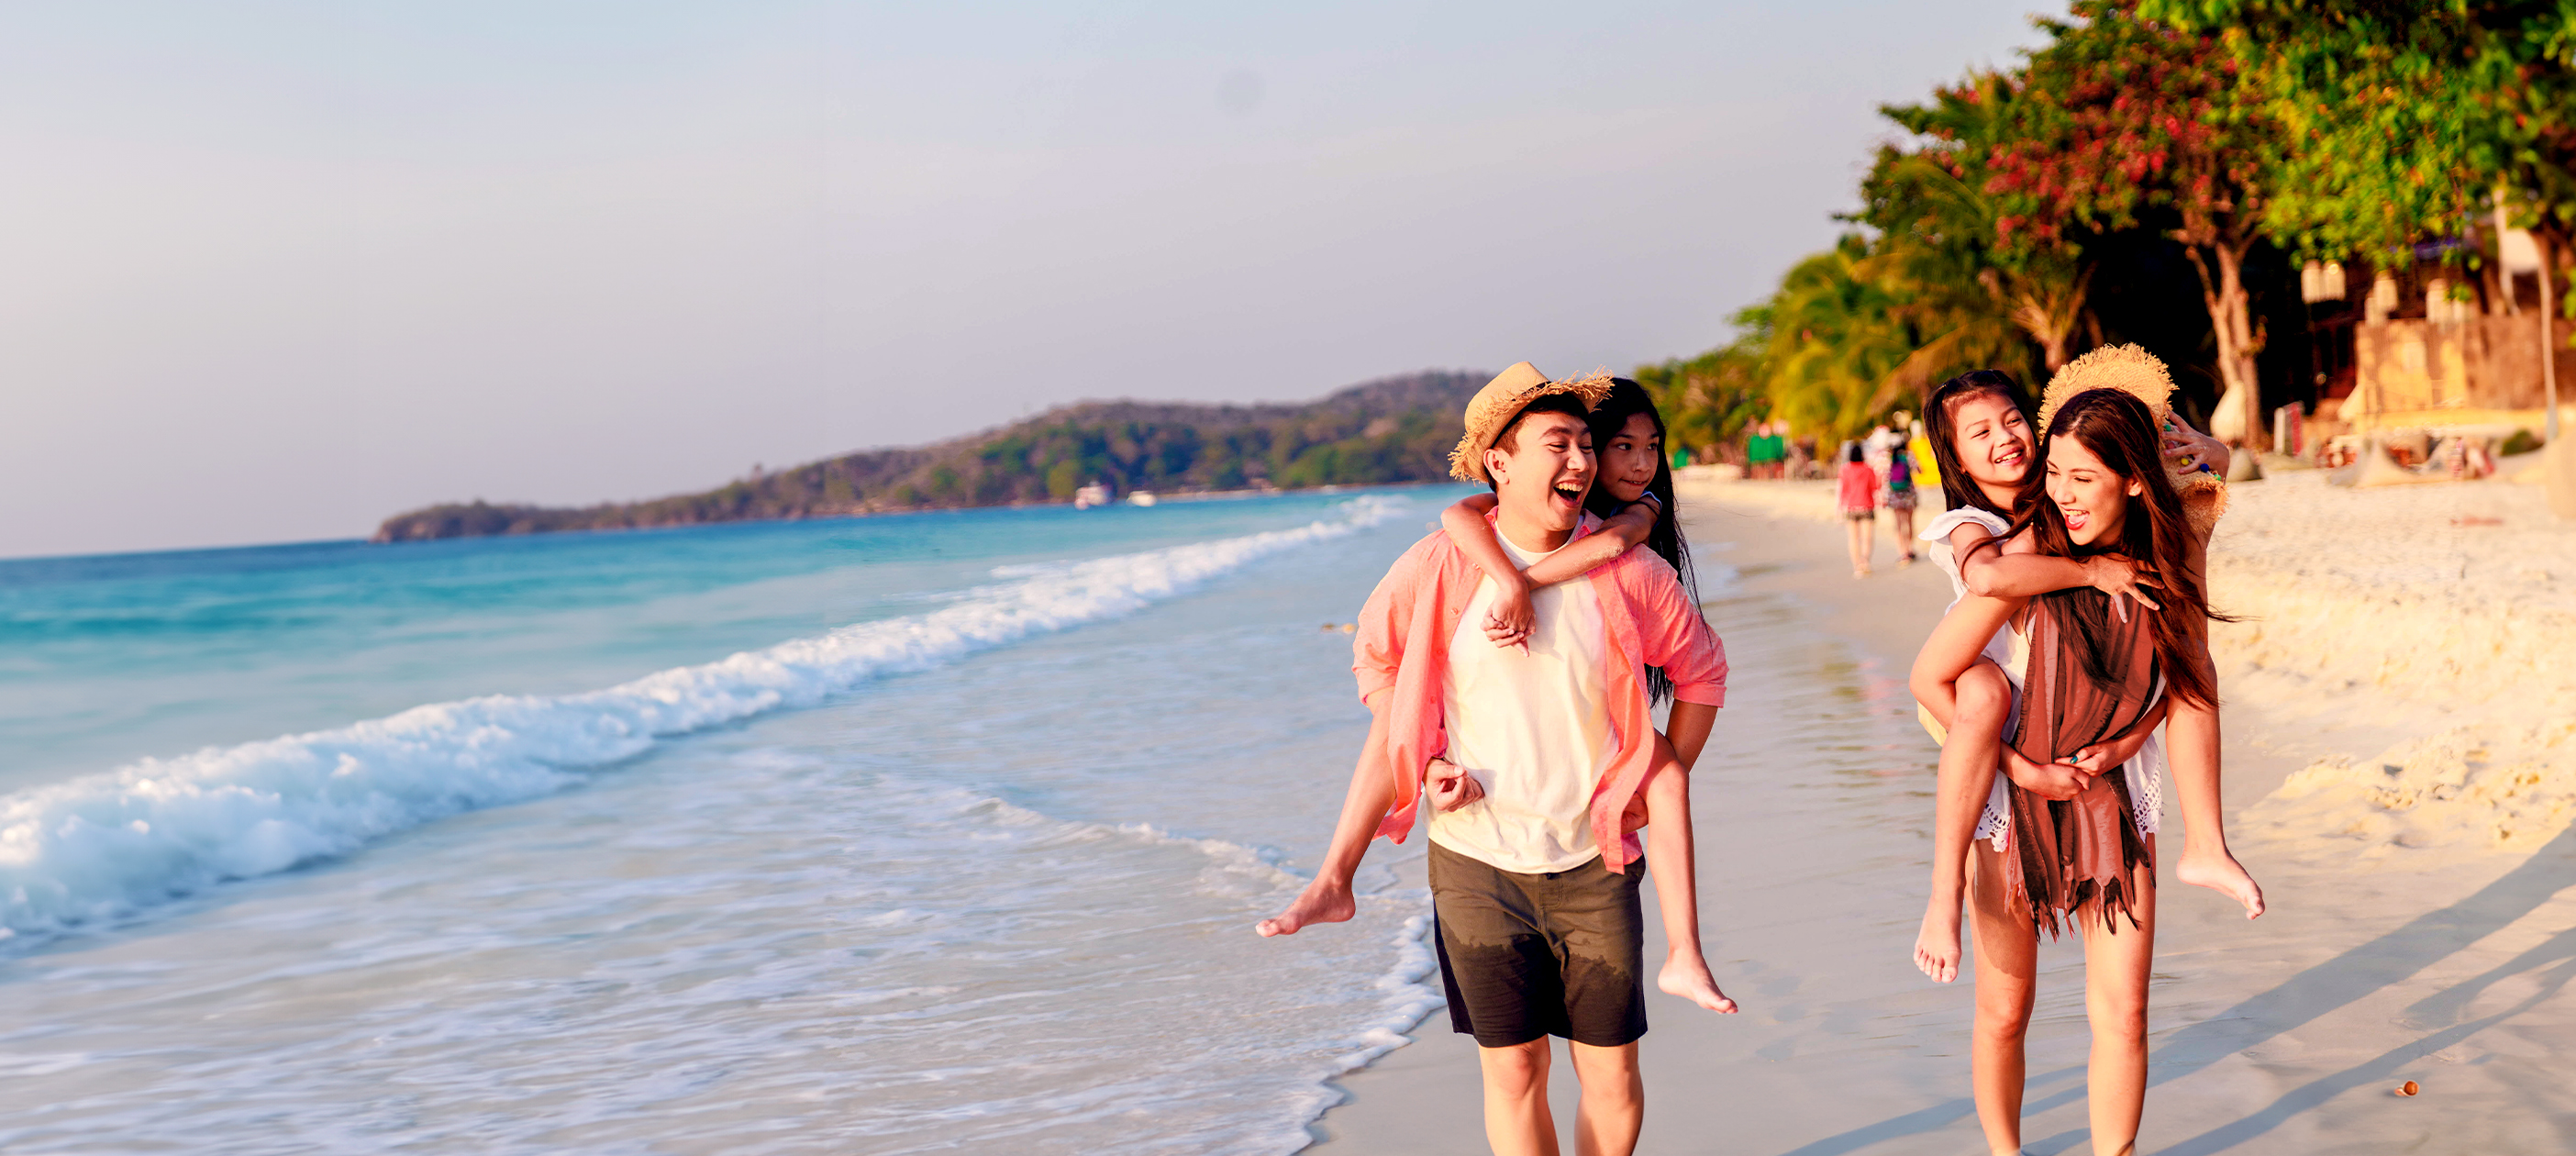 Travel insurance to protect your holiday